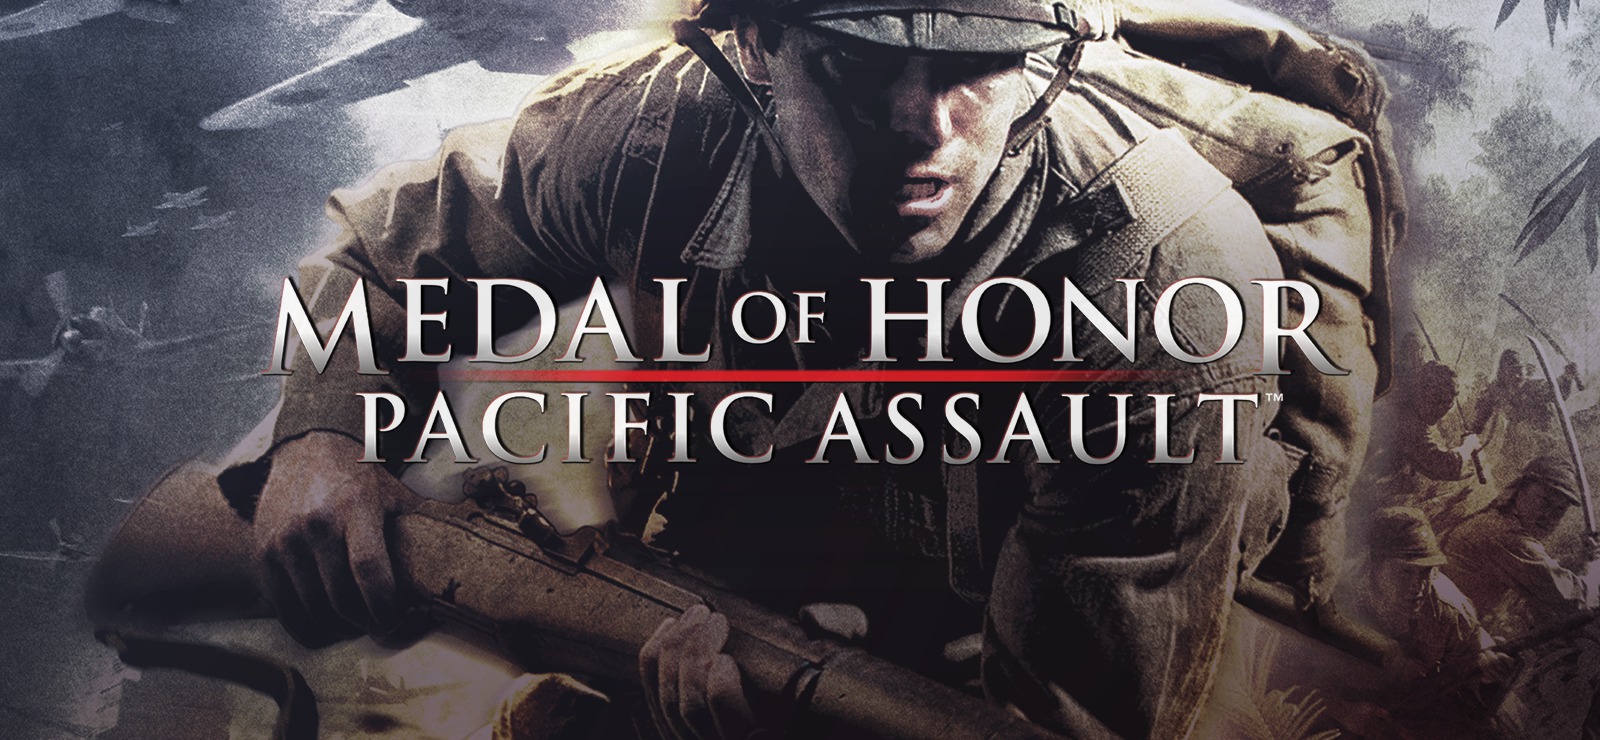 medal of honor pc hd